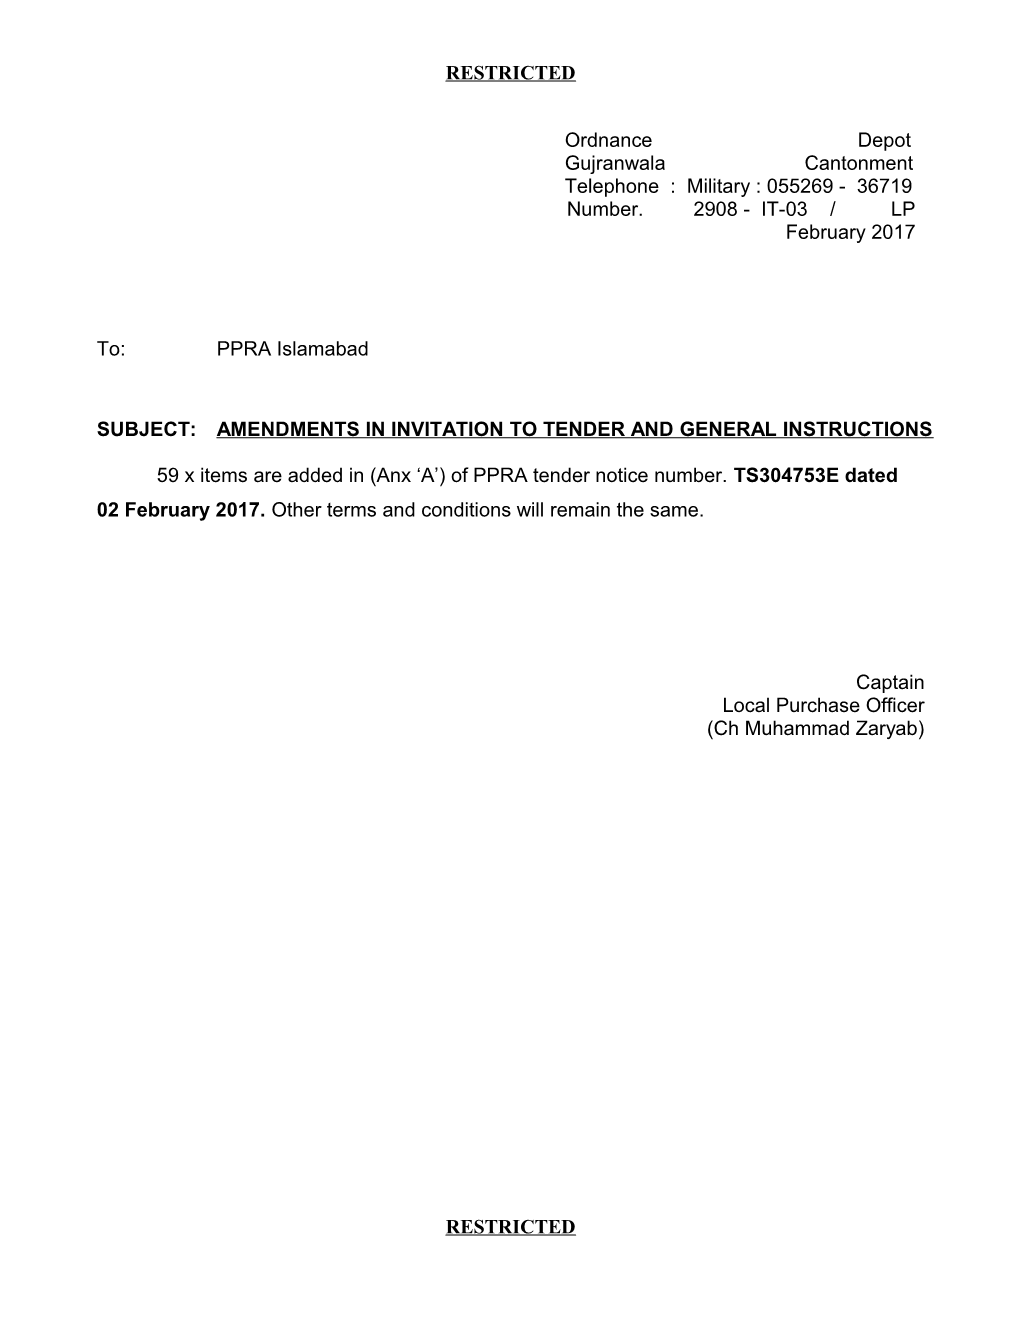 Subject:Amendments in Invitation to Tender and General Instructions